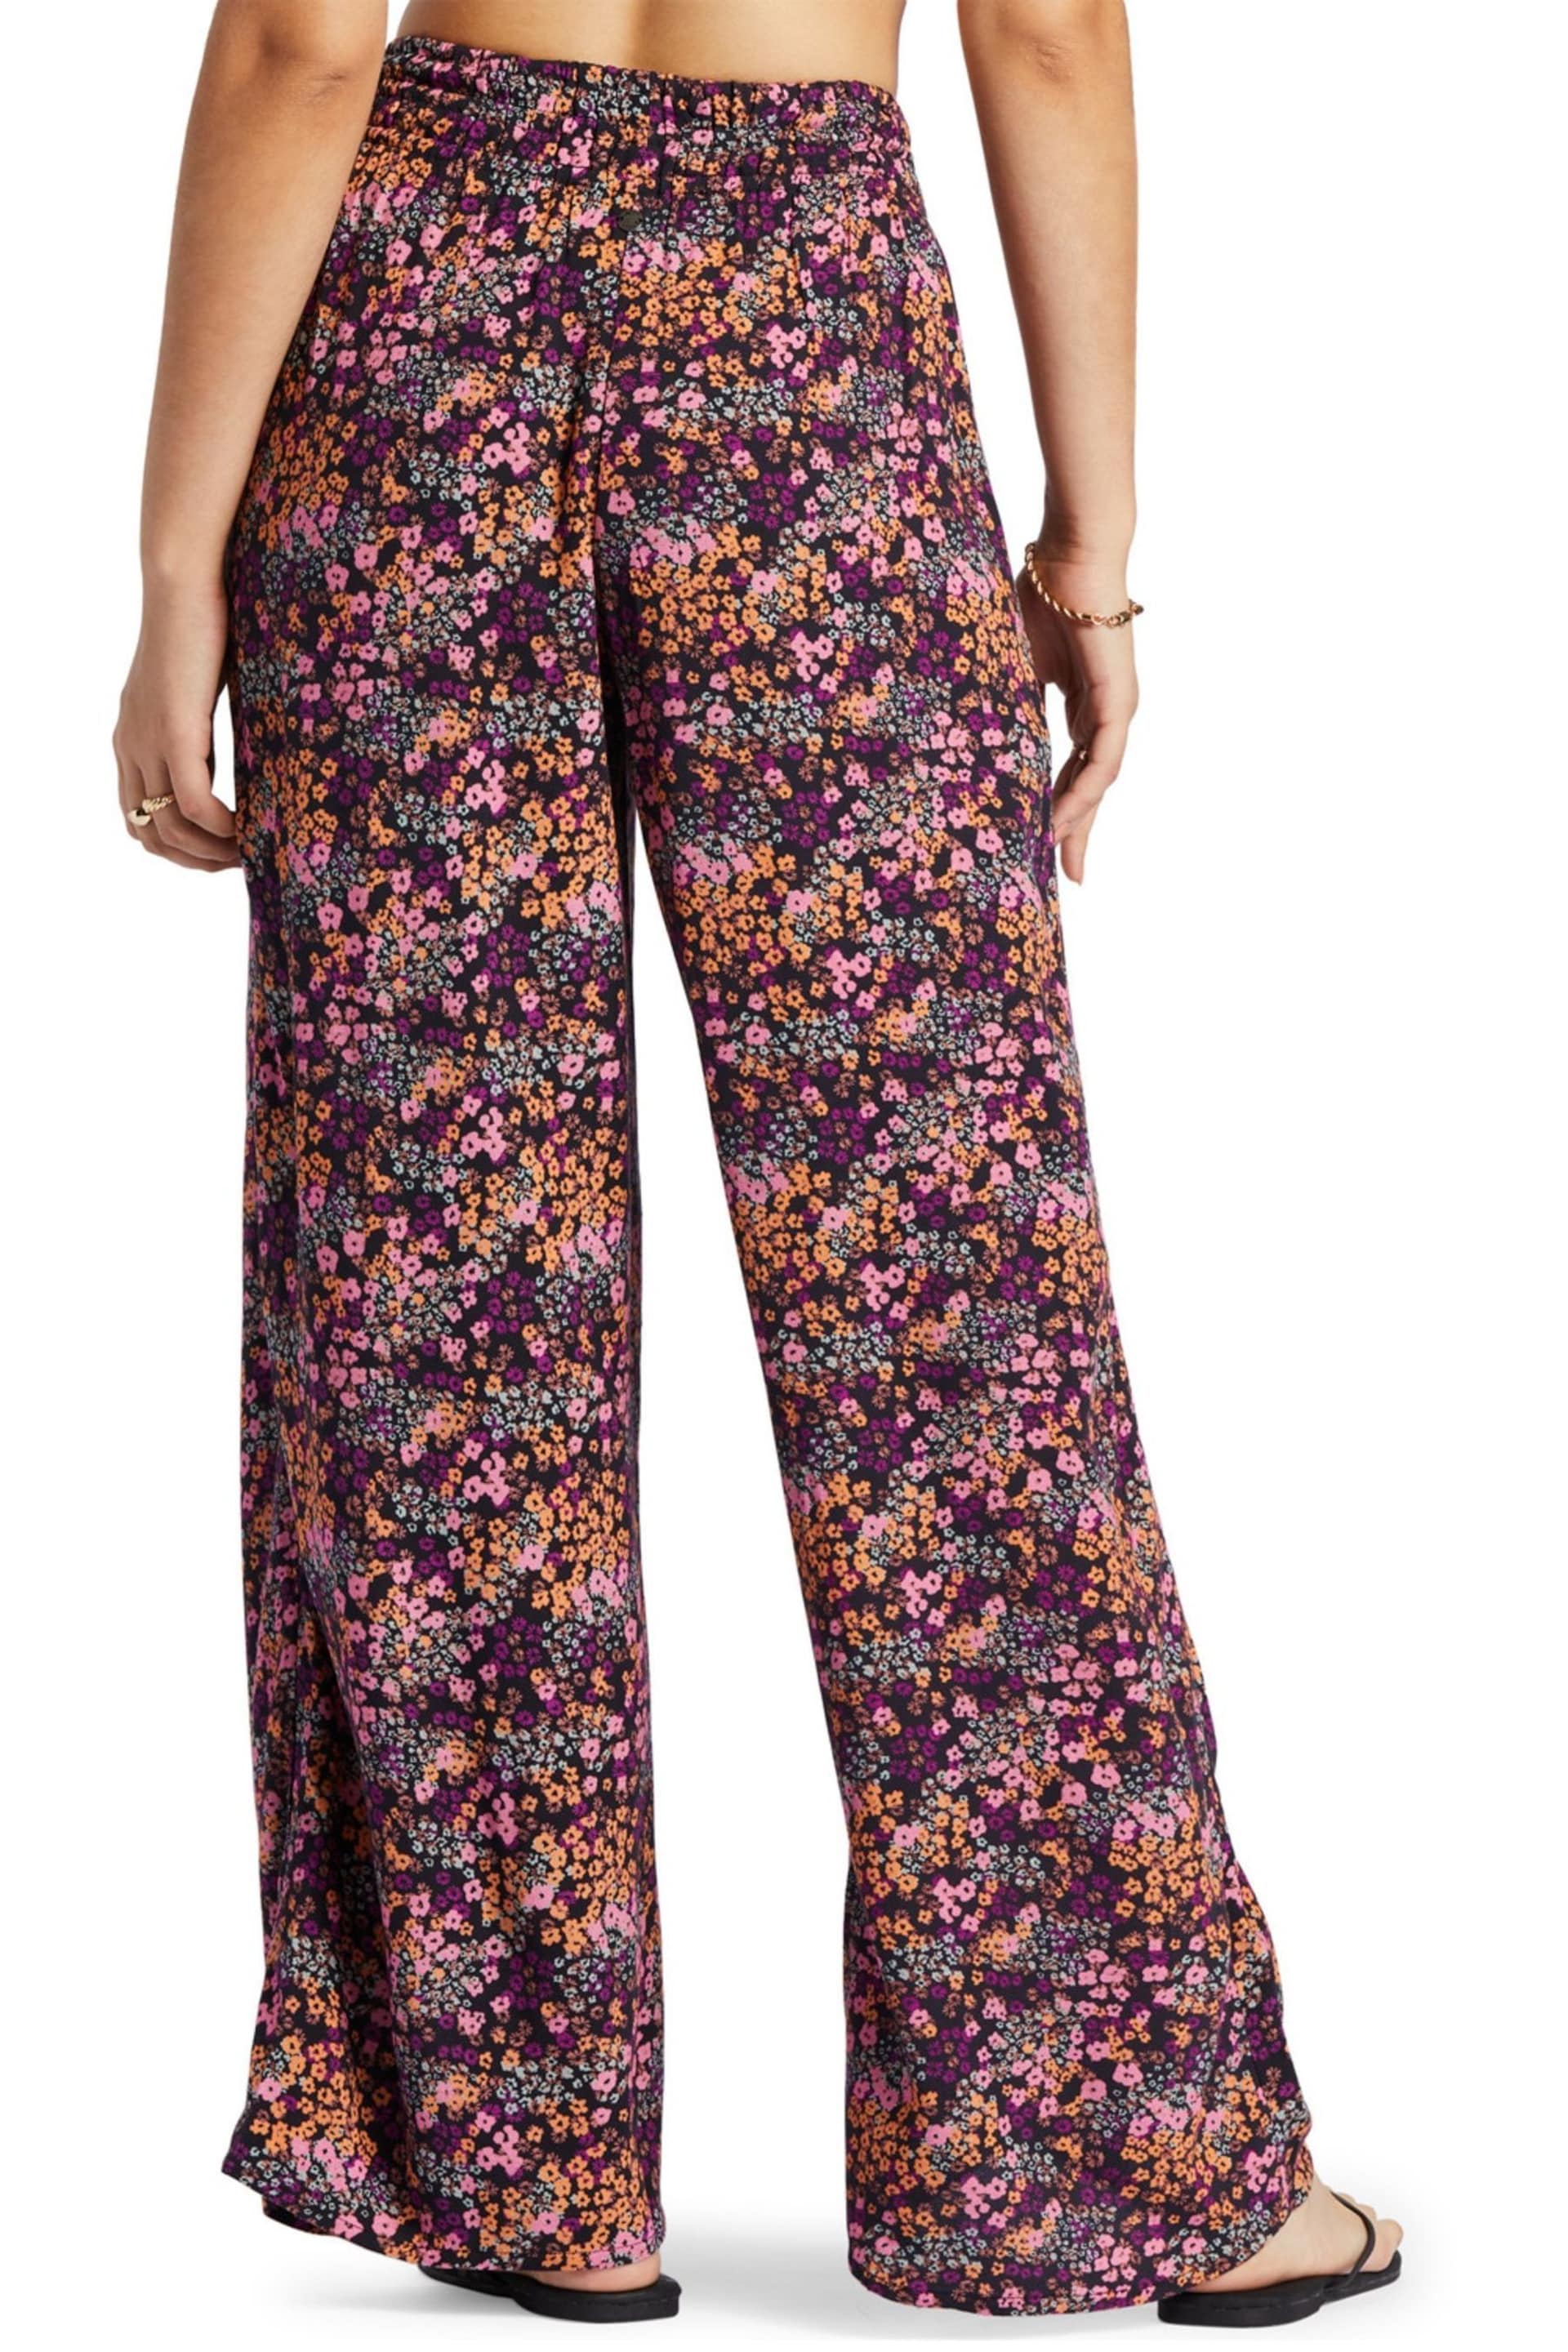 Roxy Forever and a Day Floral Printed Black Trousers - Image 3 of 5